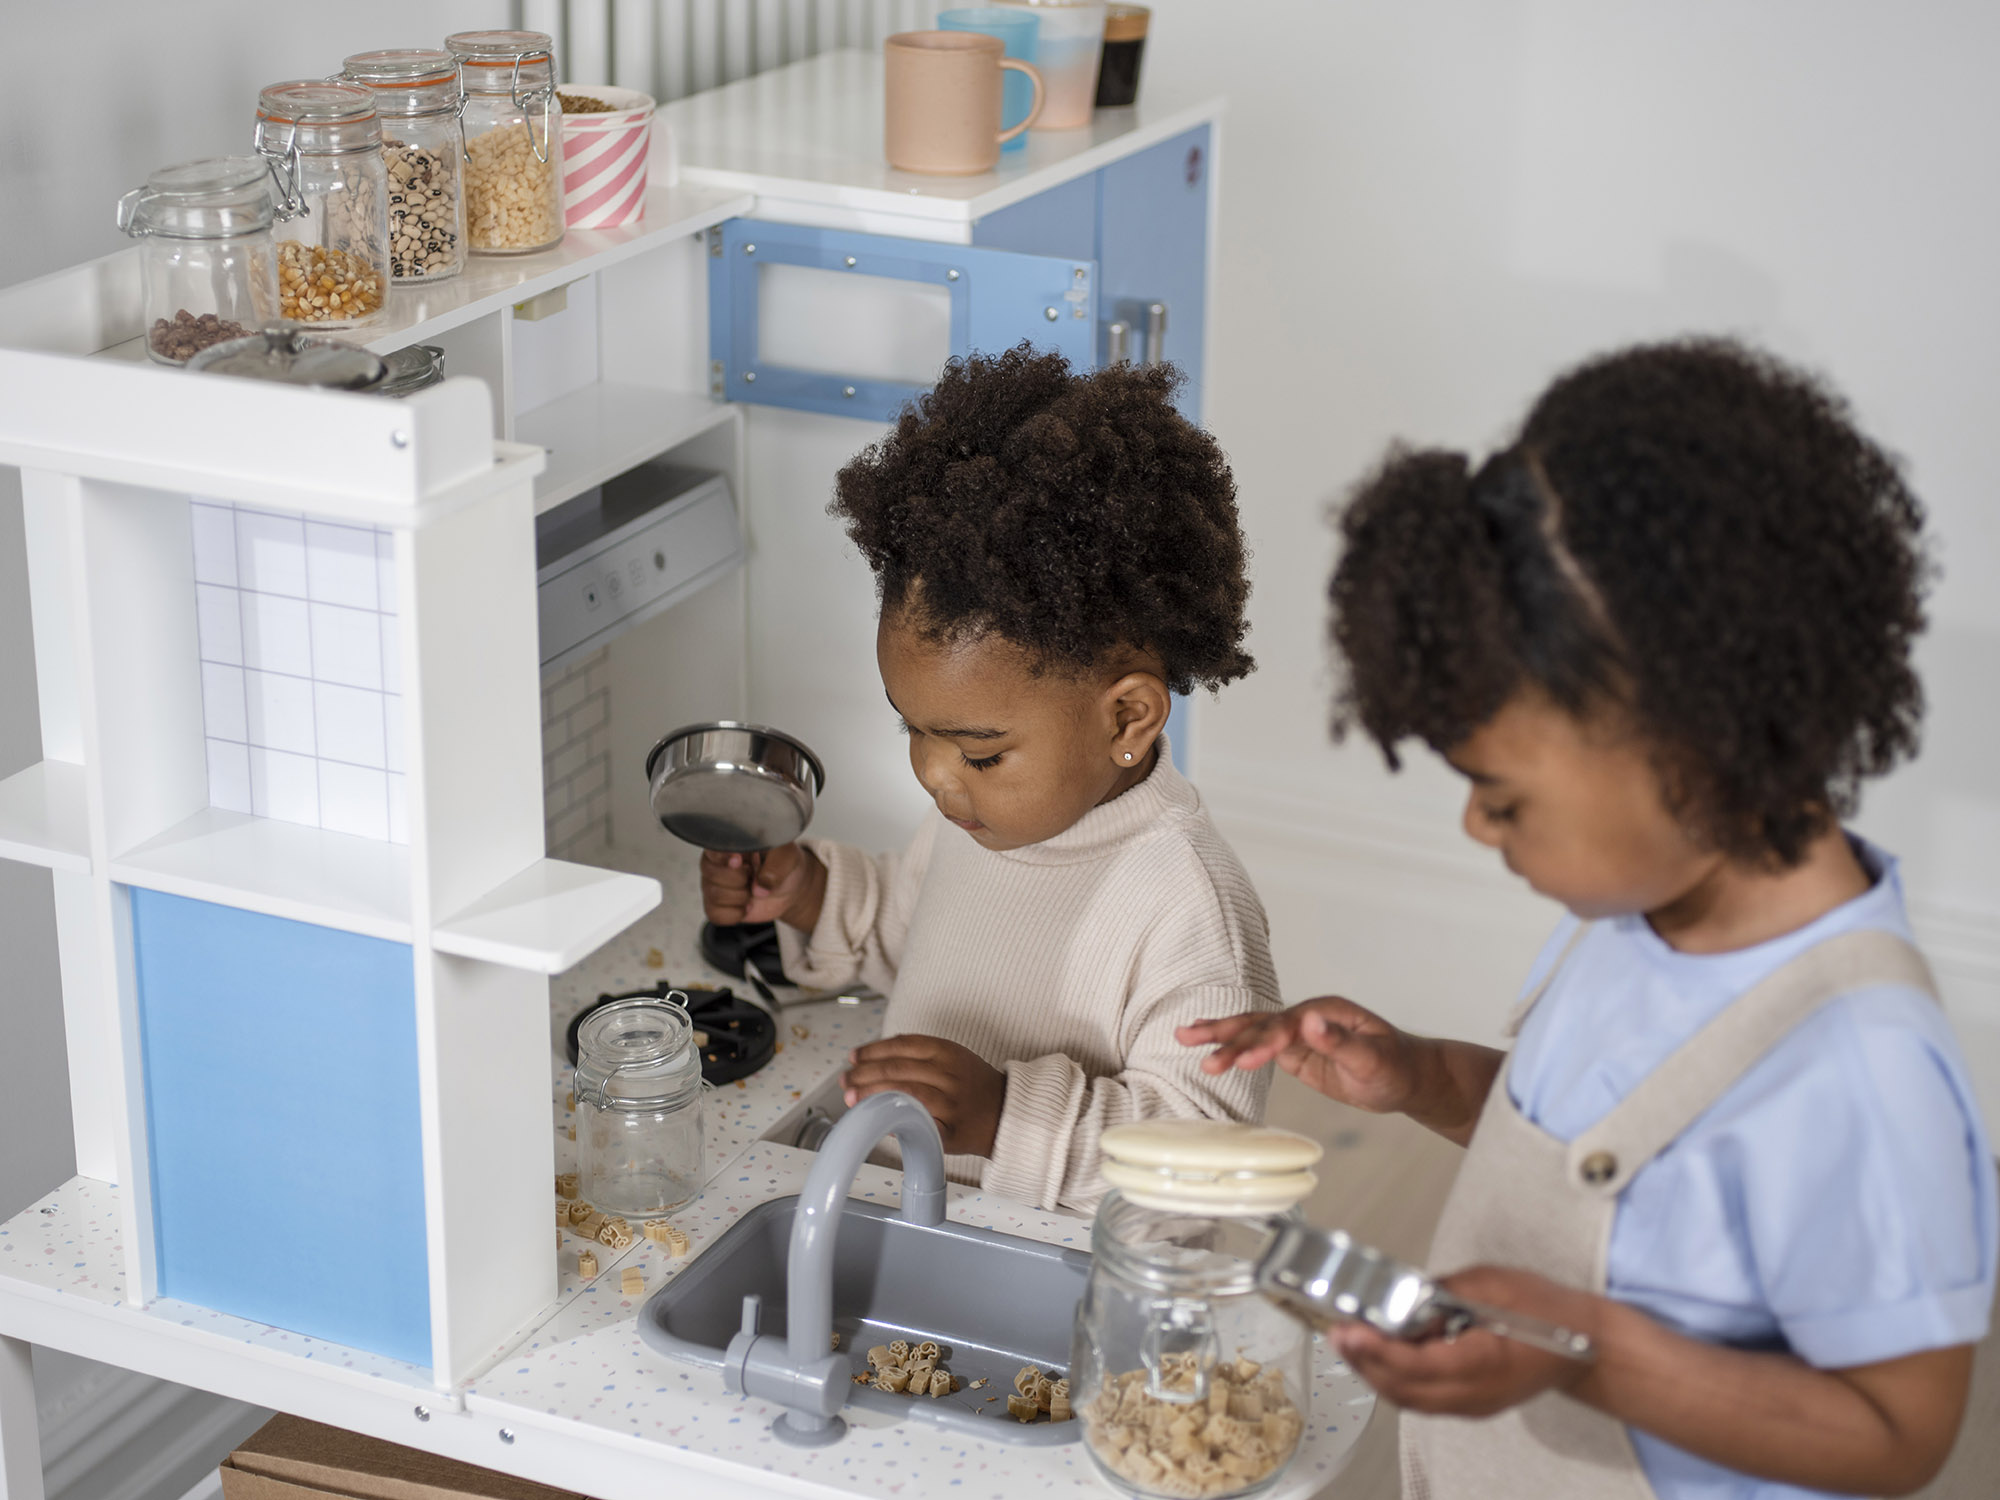 8 Benefits of Play Kitchens for Children